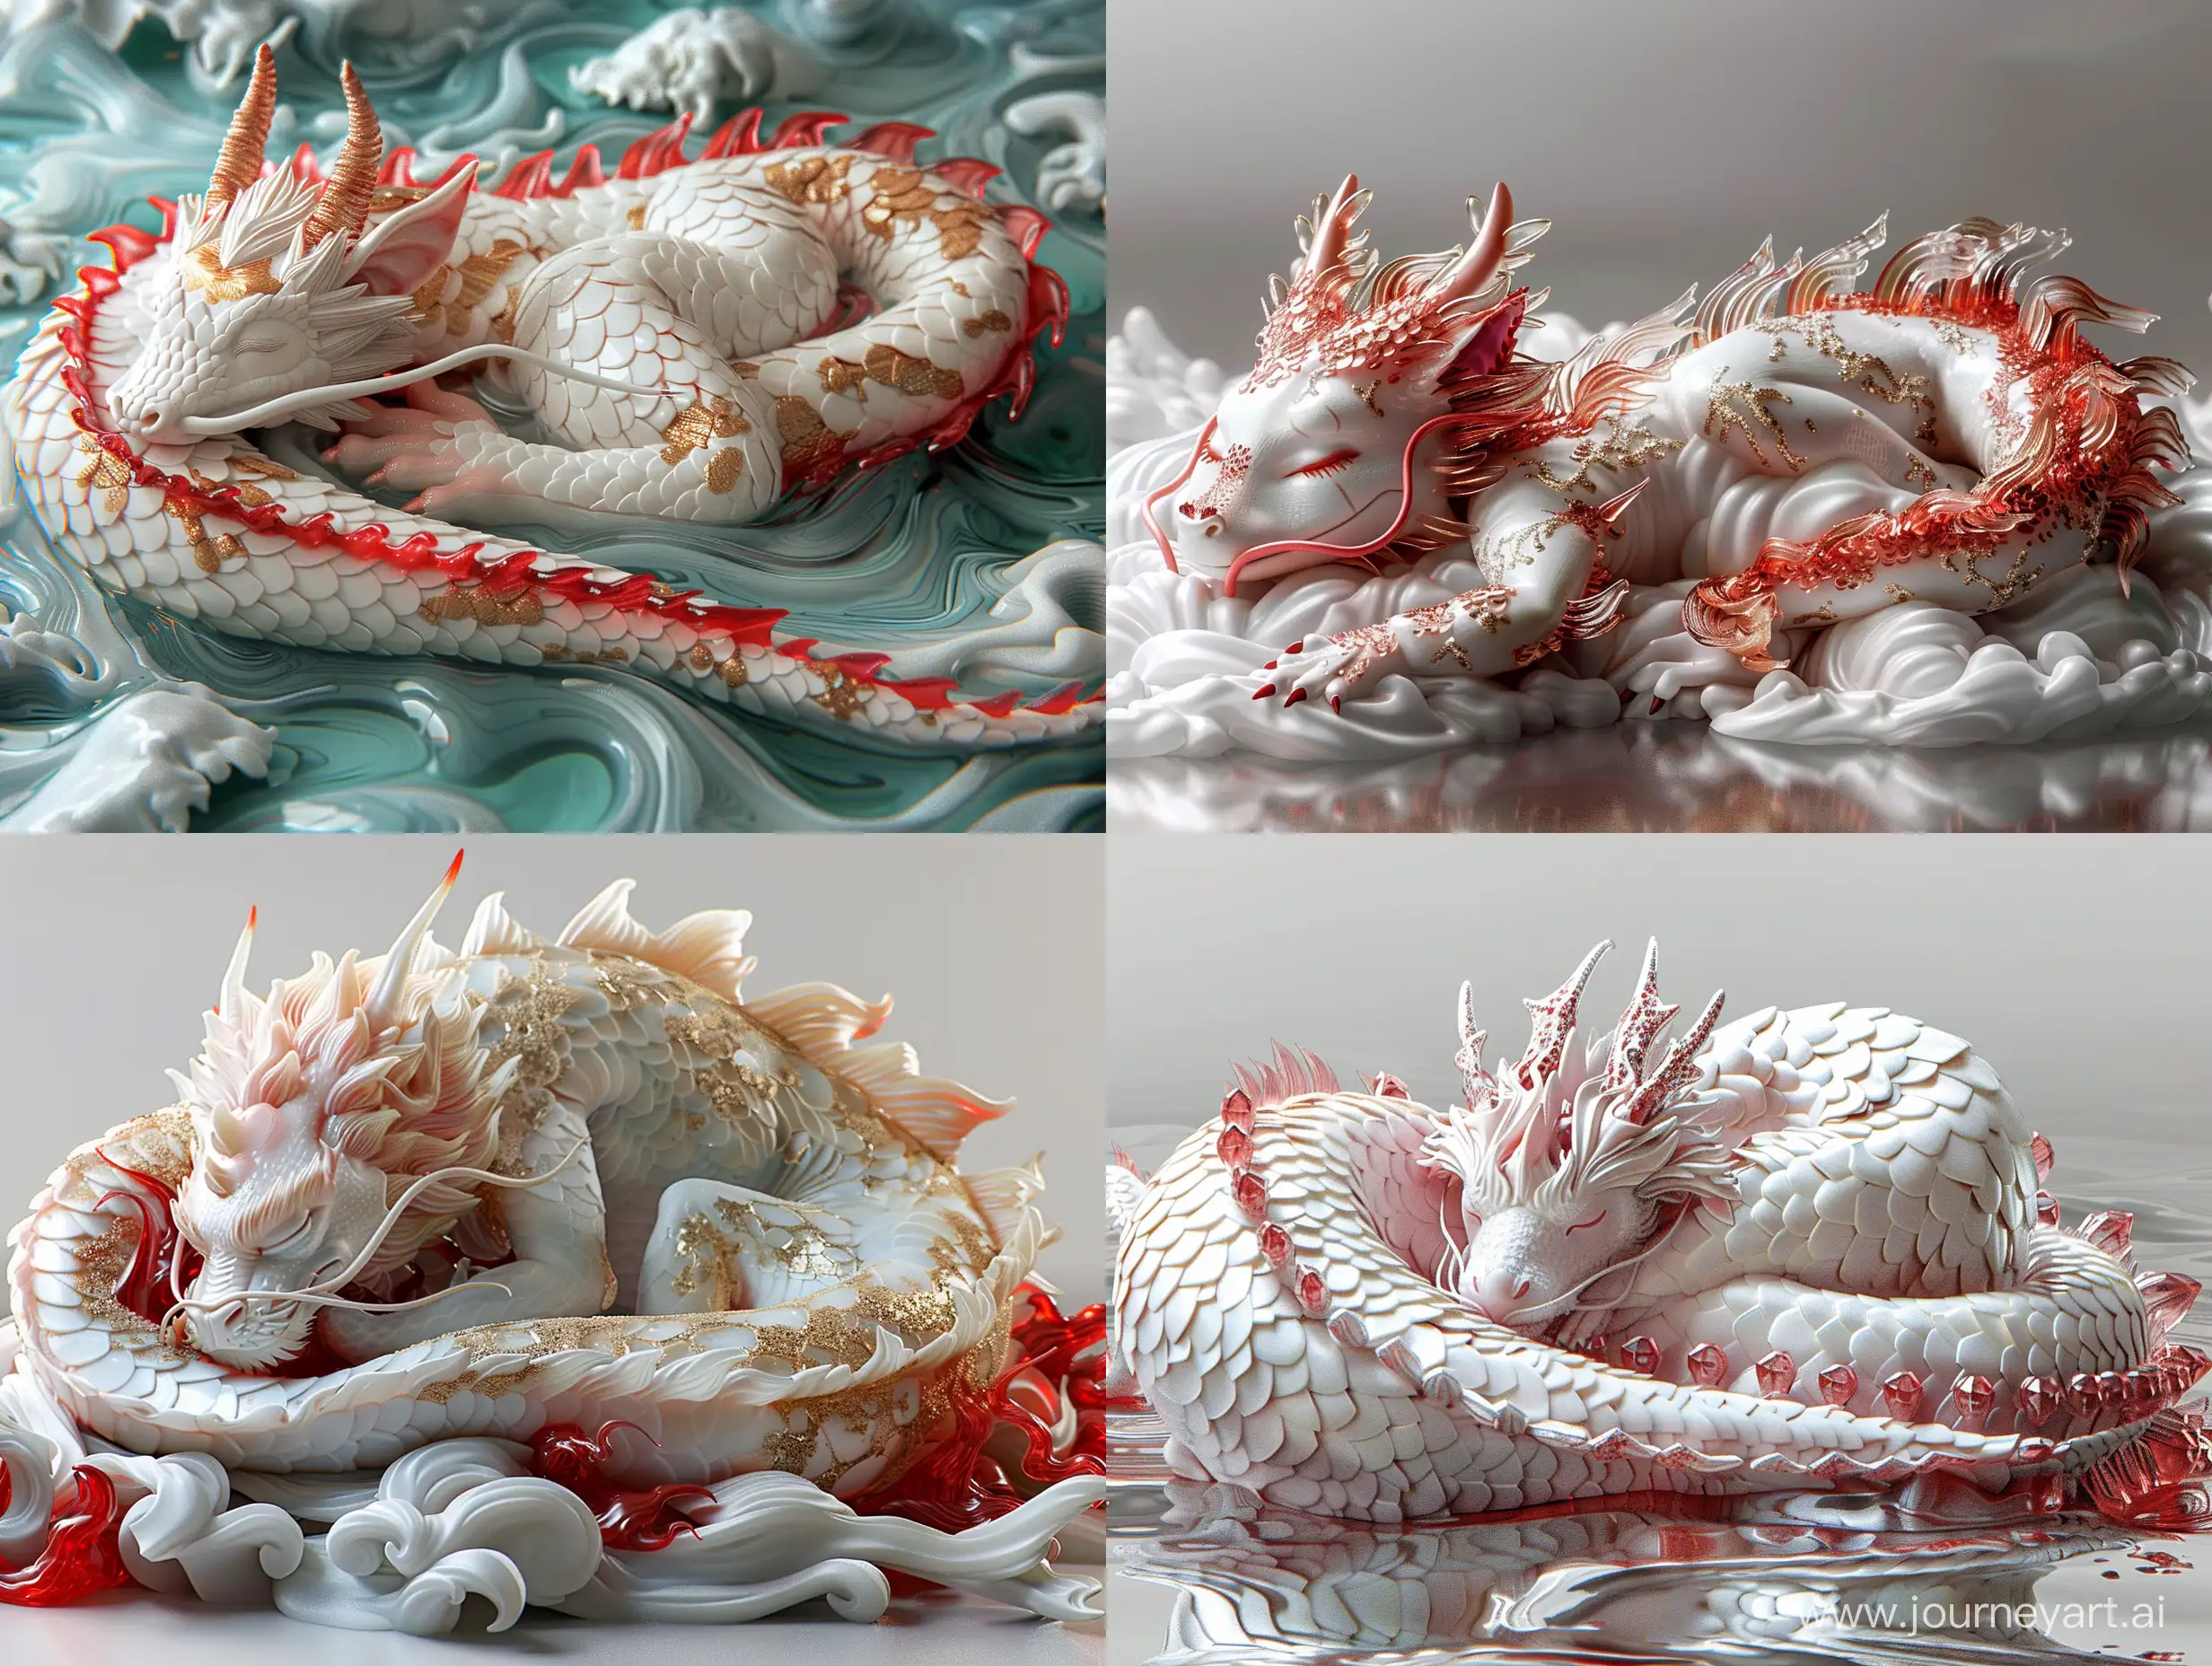 Dragon sleeping on seas, translucent glass, zbrush, ruby and gold style, anime aesthetics, furry art, red and white, elaborate, c4d rendering, super high detail, 3d stylize 250